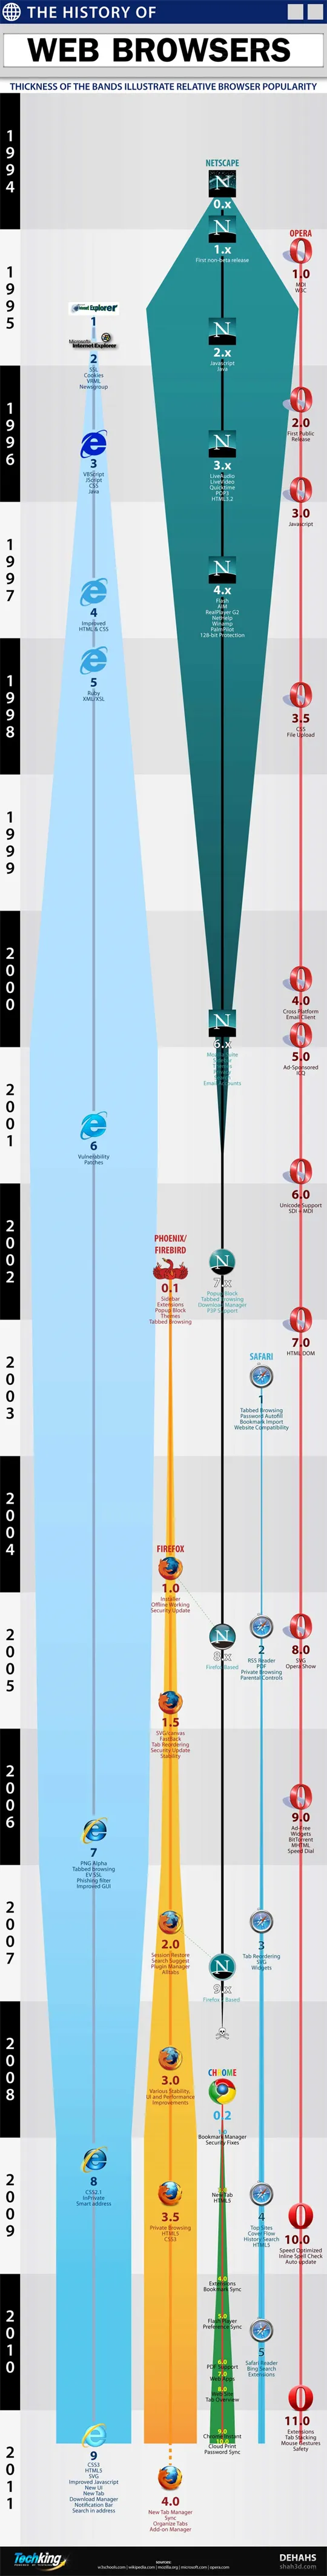 The Evolution Of Web Browsers (Infographic) 4